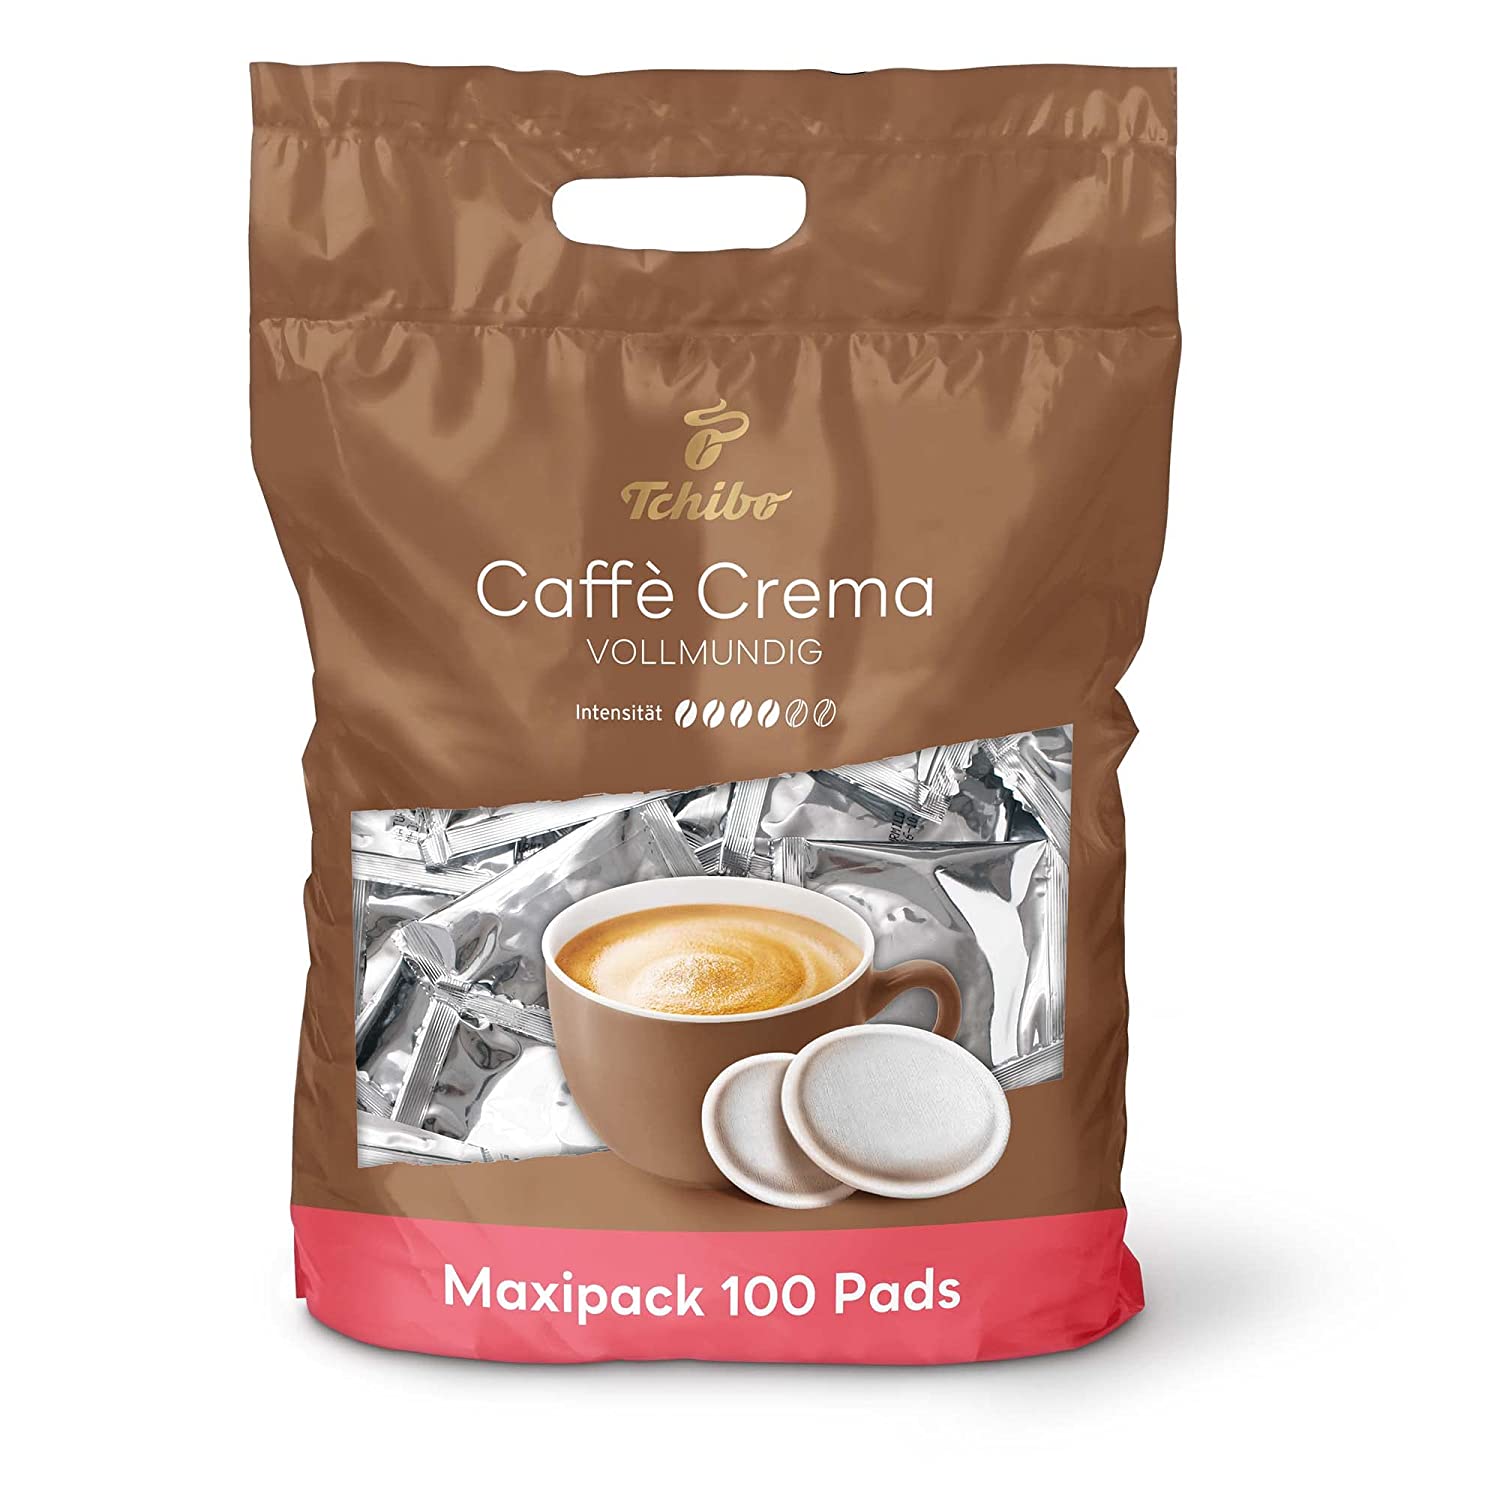 Tchibo Maxipack, Caffè Crema full-bodied, 100 pieces – 1x 100 pads (coffee, balanced and full-bodied), sustainable, suitable for Senseo machines